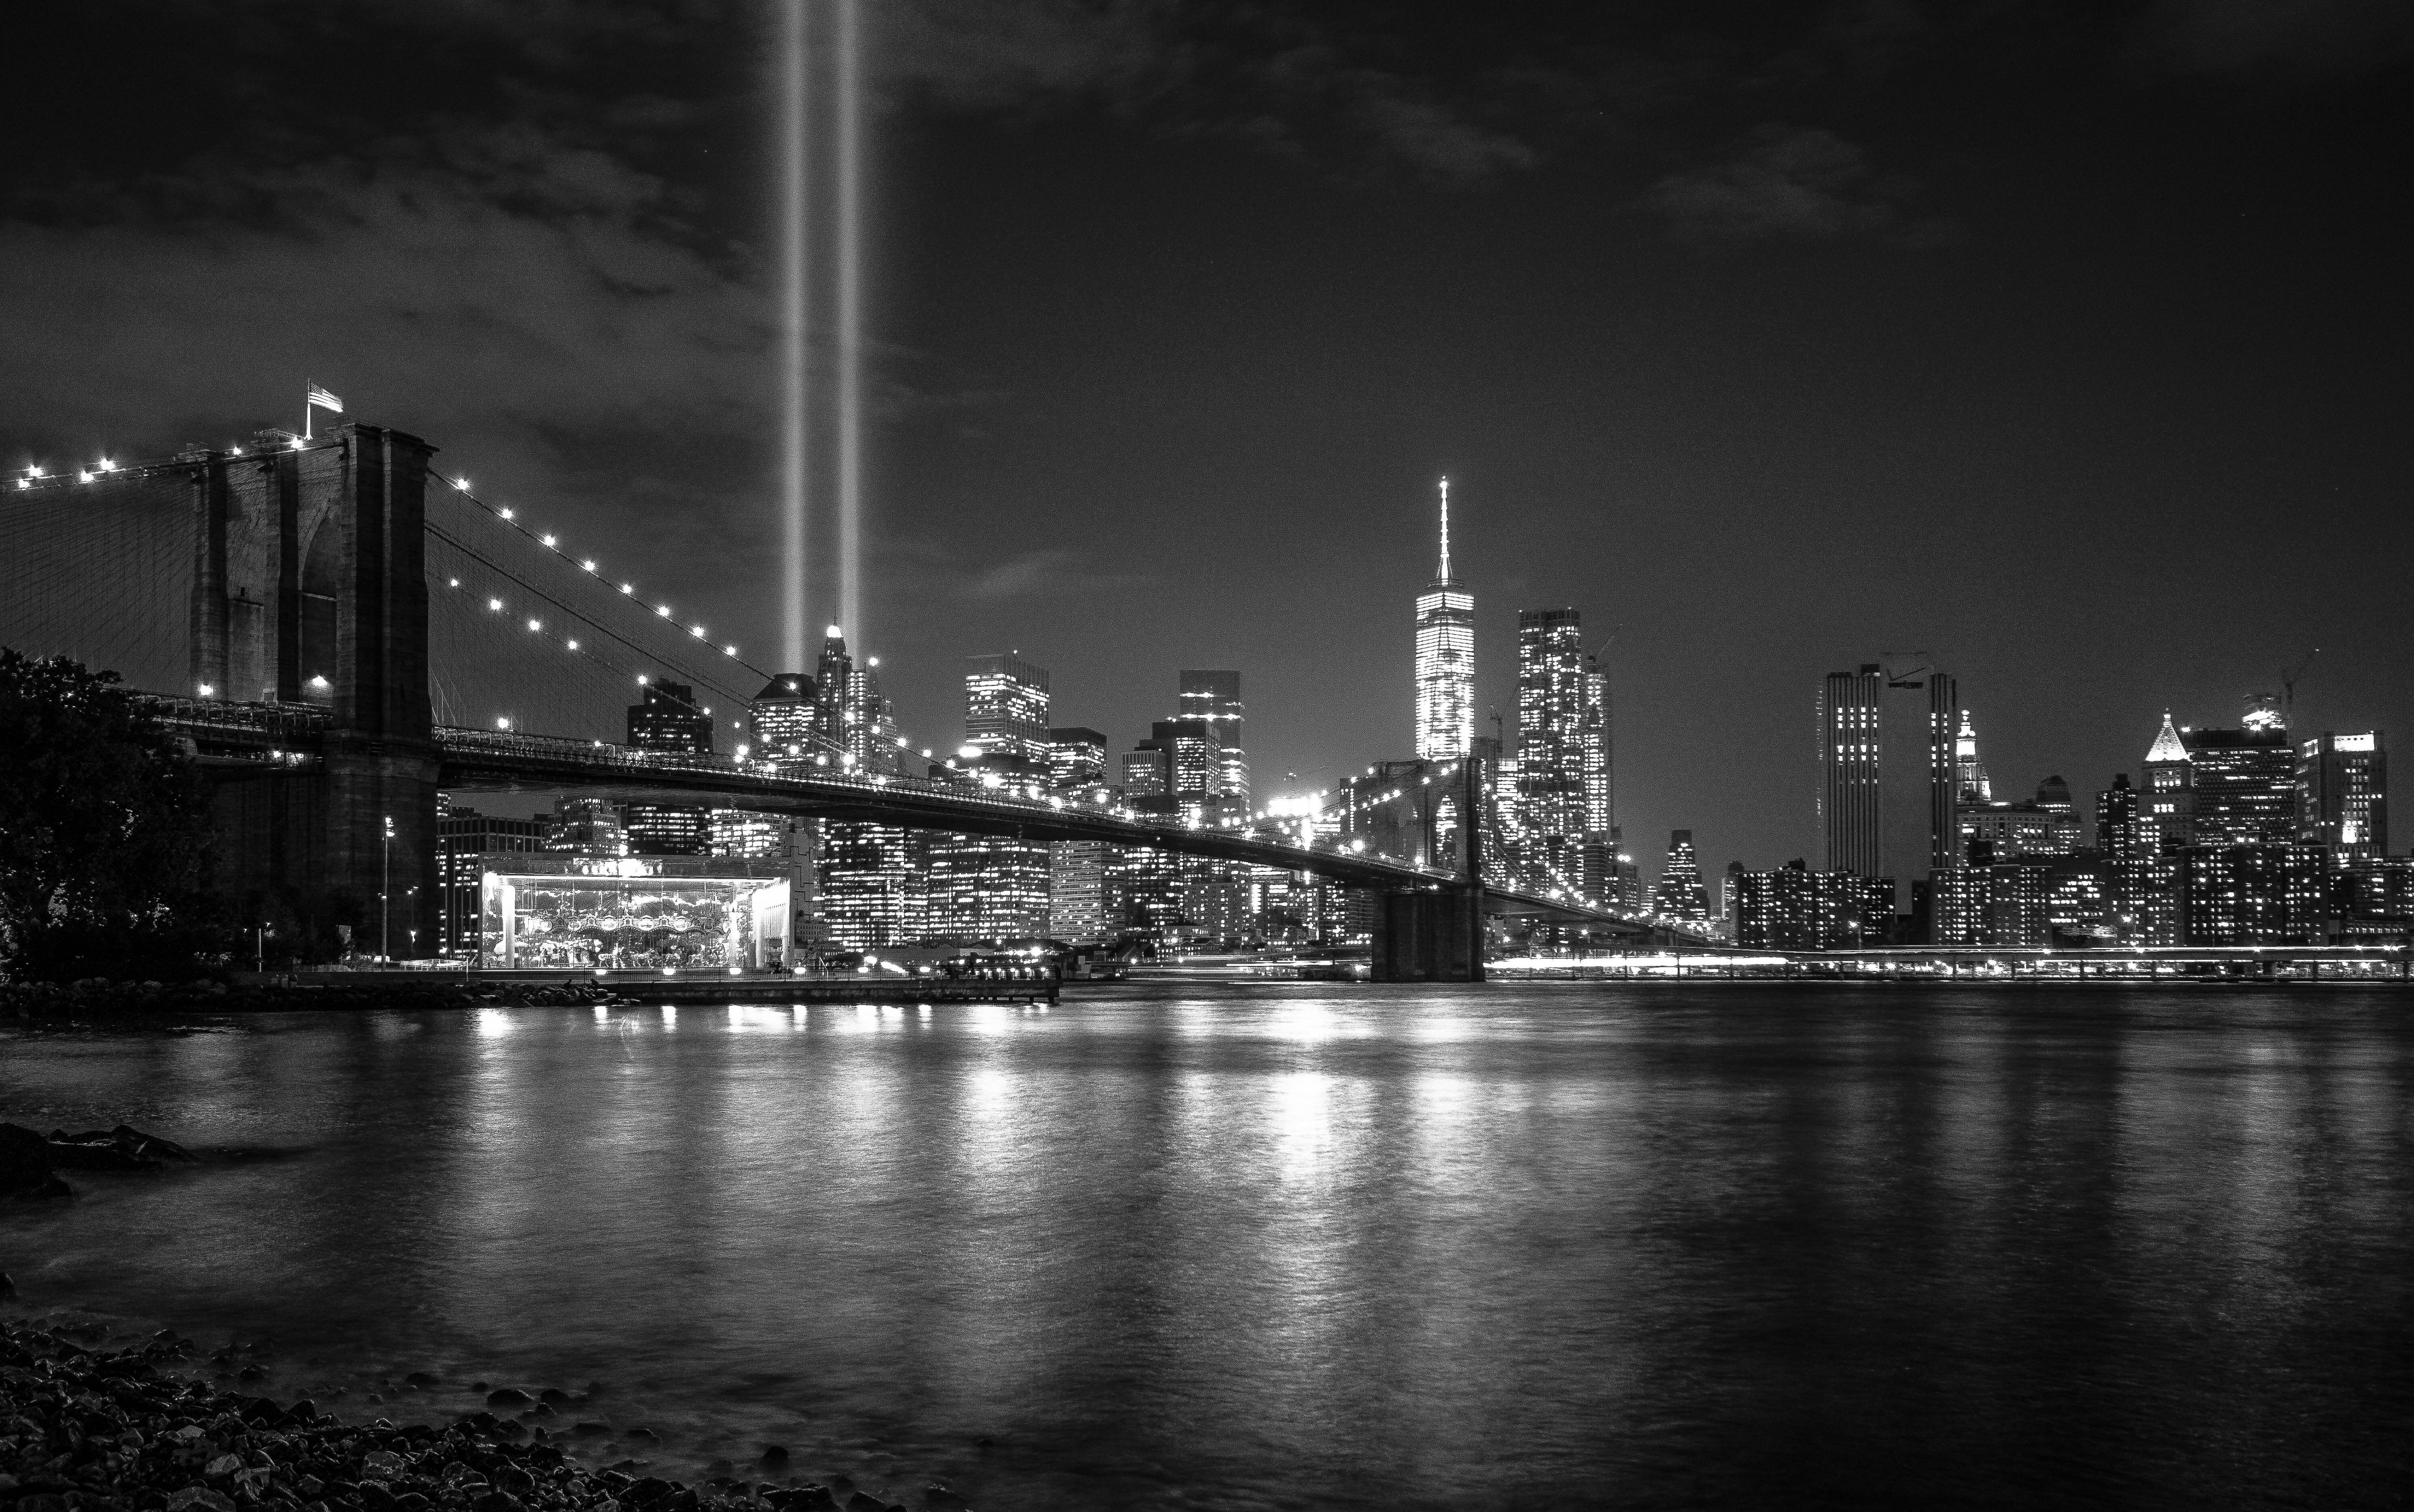 Figure 2. Light beams in the place of twin towers in memory of the September 11 terrorist attacks in New York